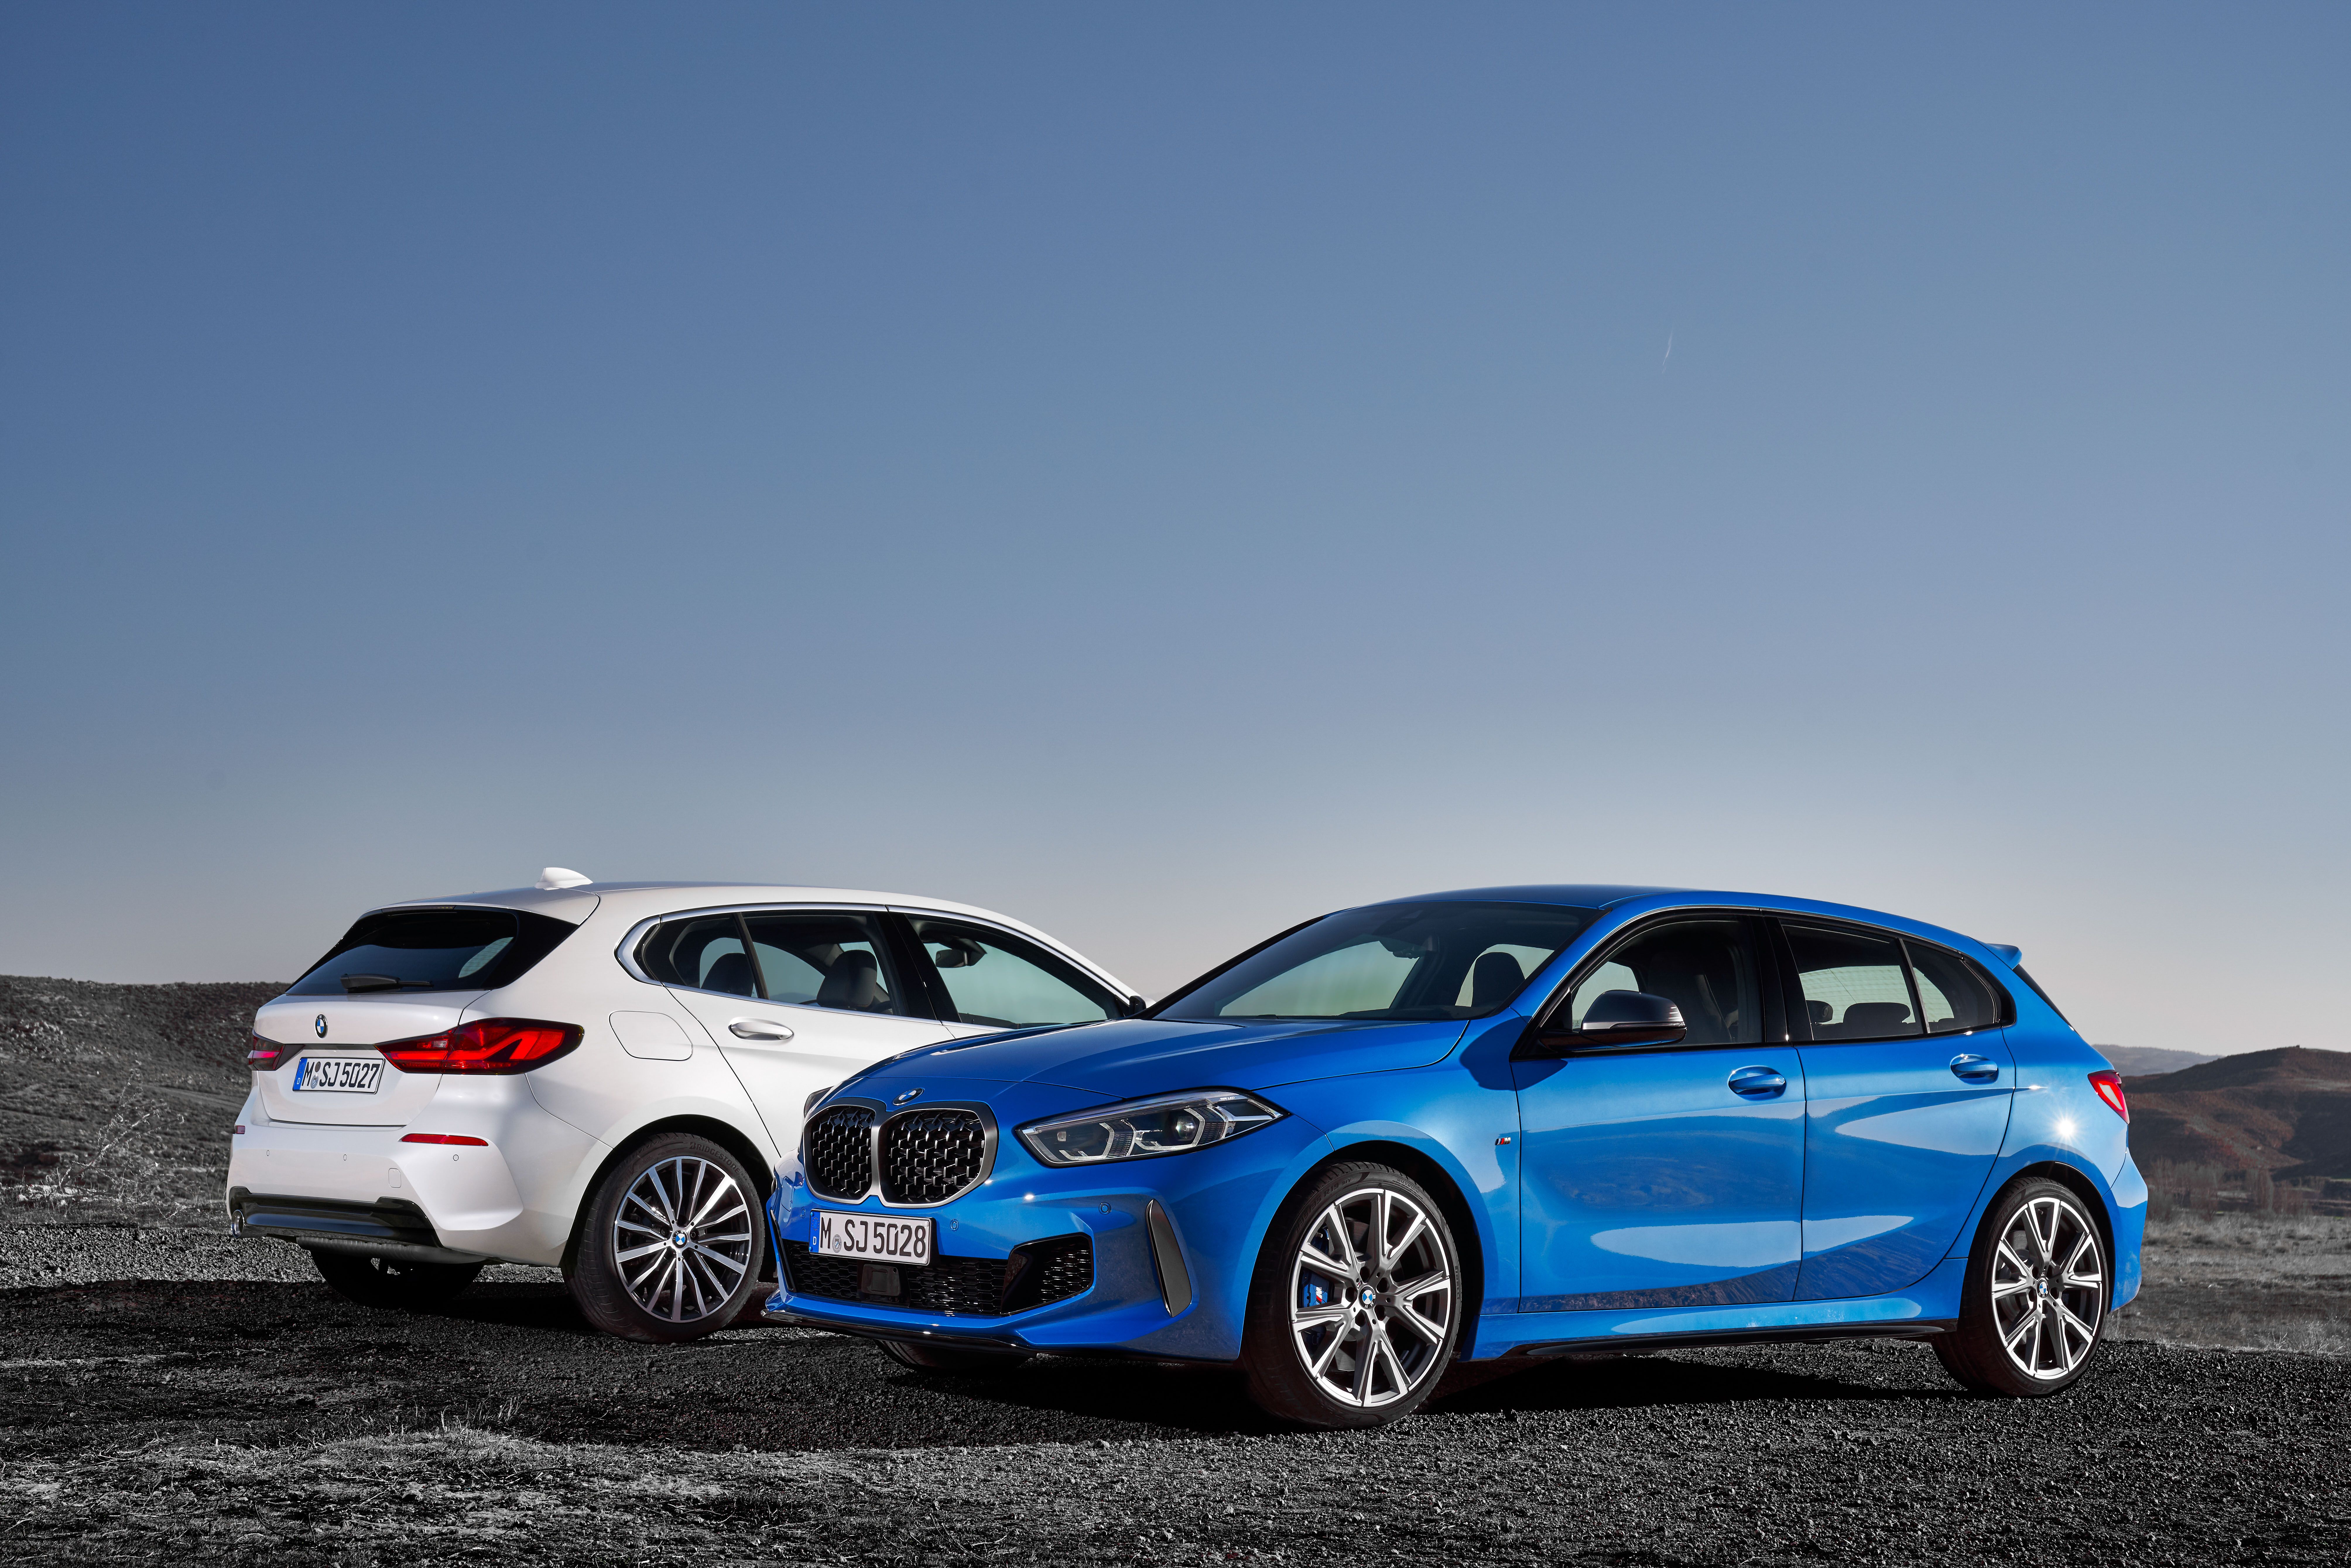 New Bmw 1 Series Hatchback Now Front Wheel Drive